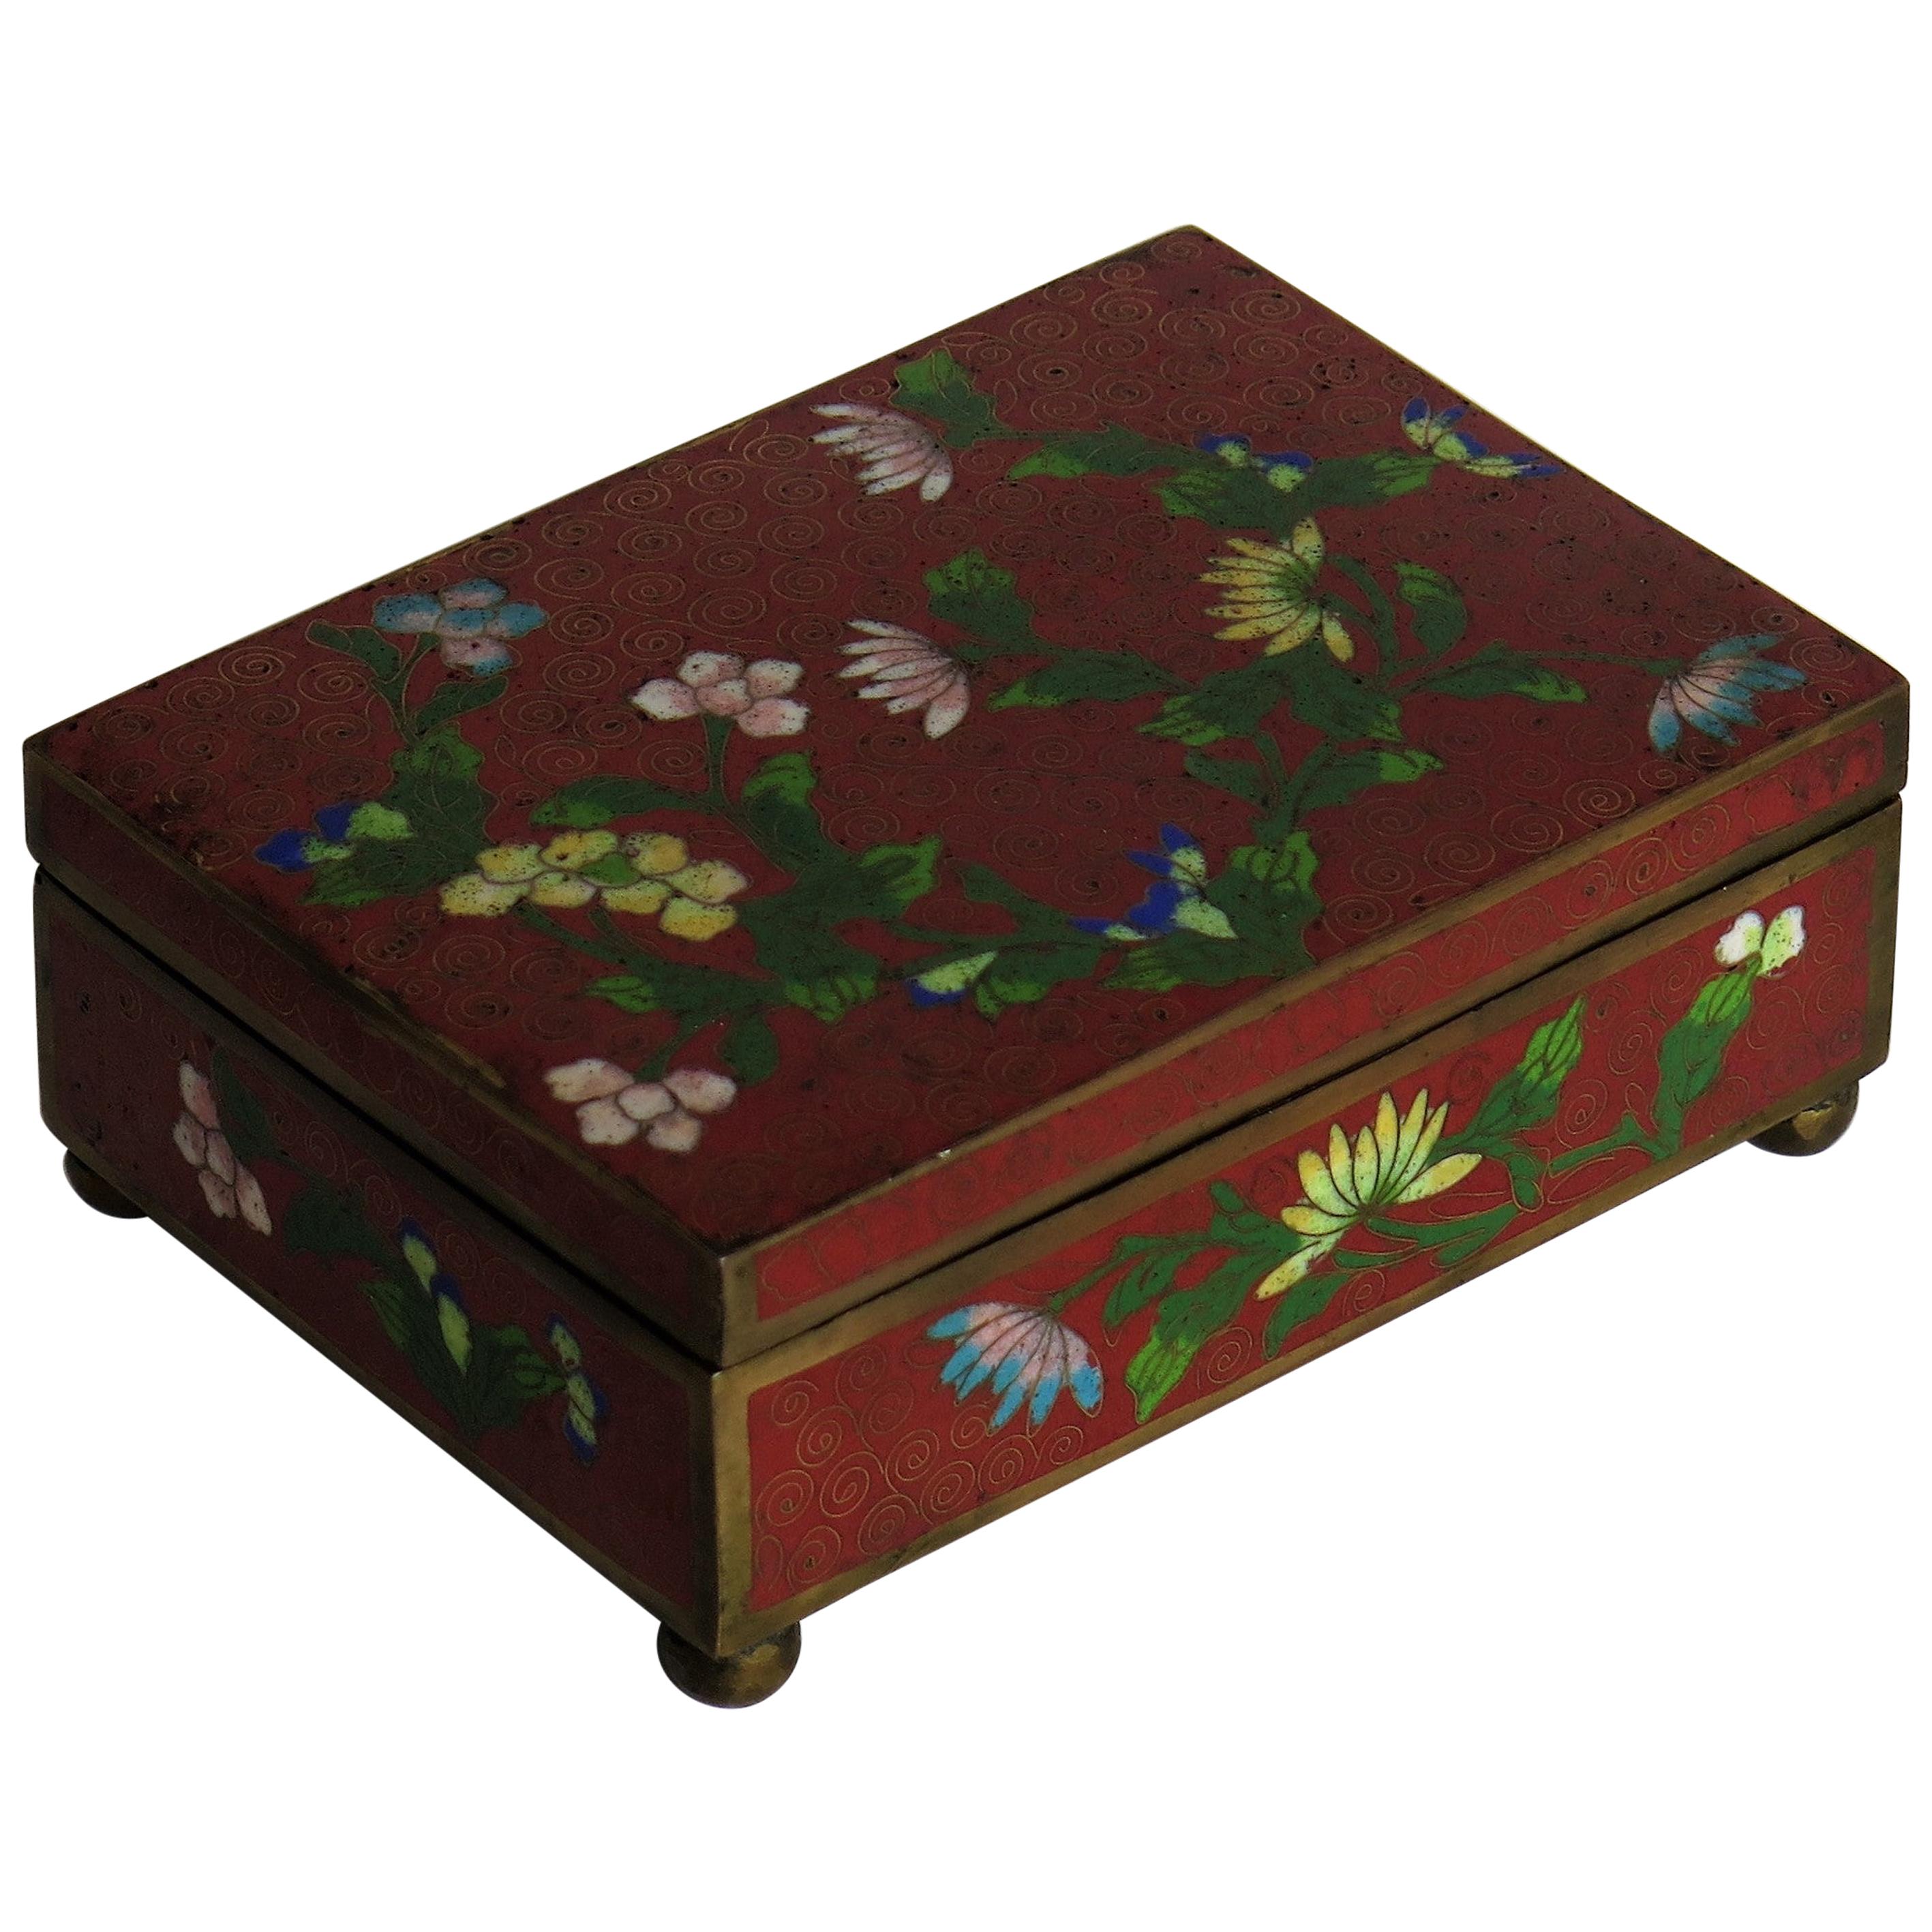 Chinese Cloisonné Box on Bun Feet with Hinged Lid, Late Qing Dynasty, circa 1900